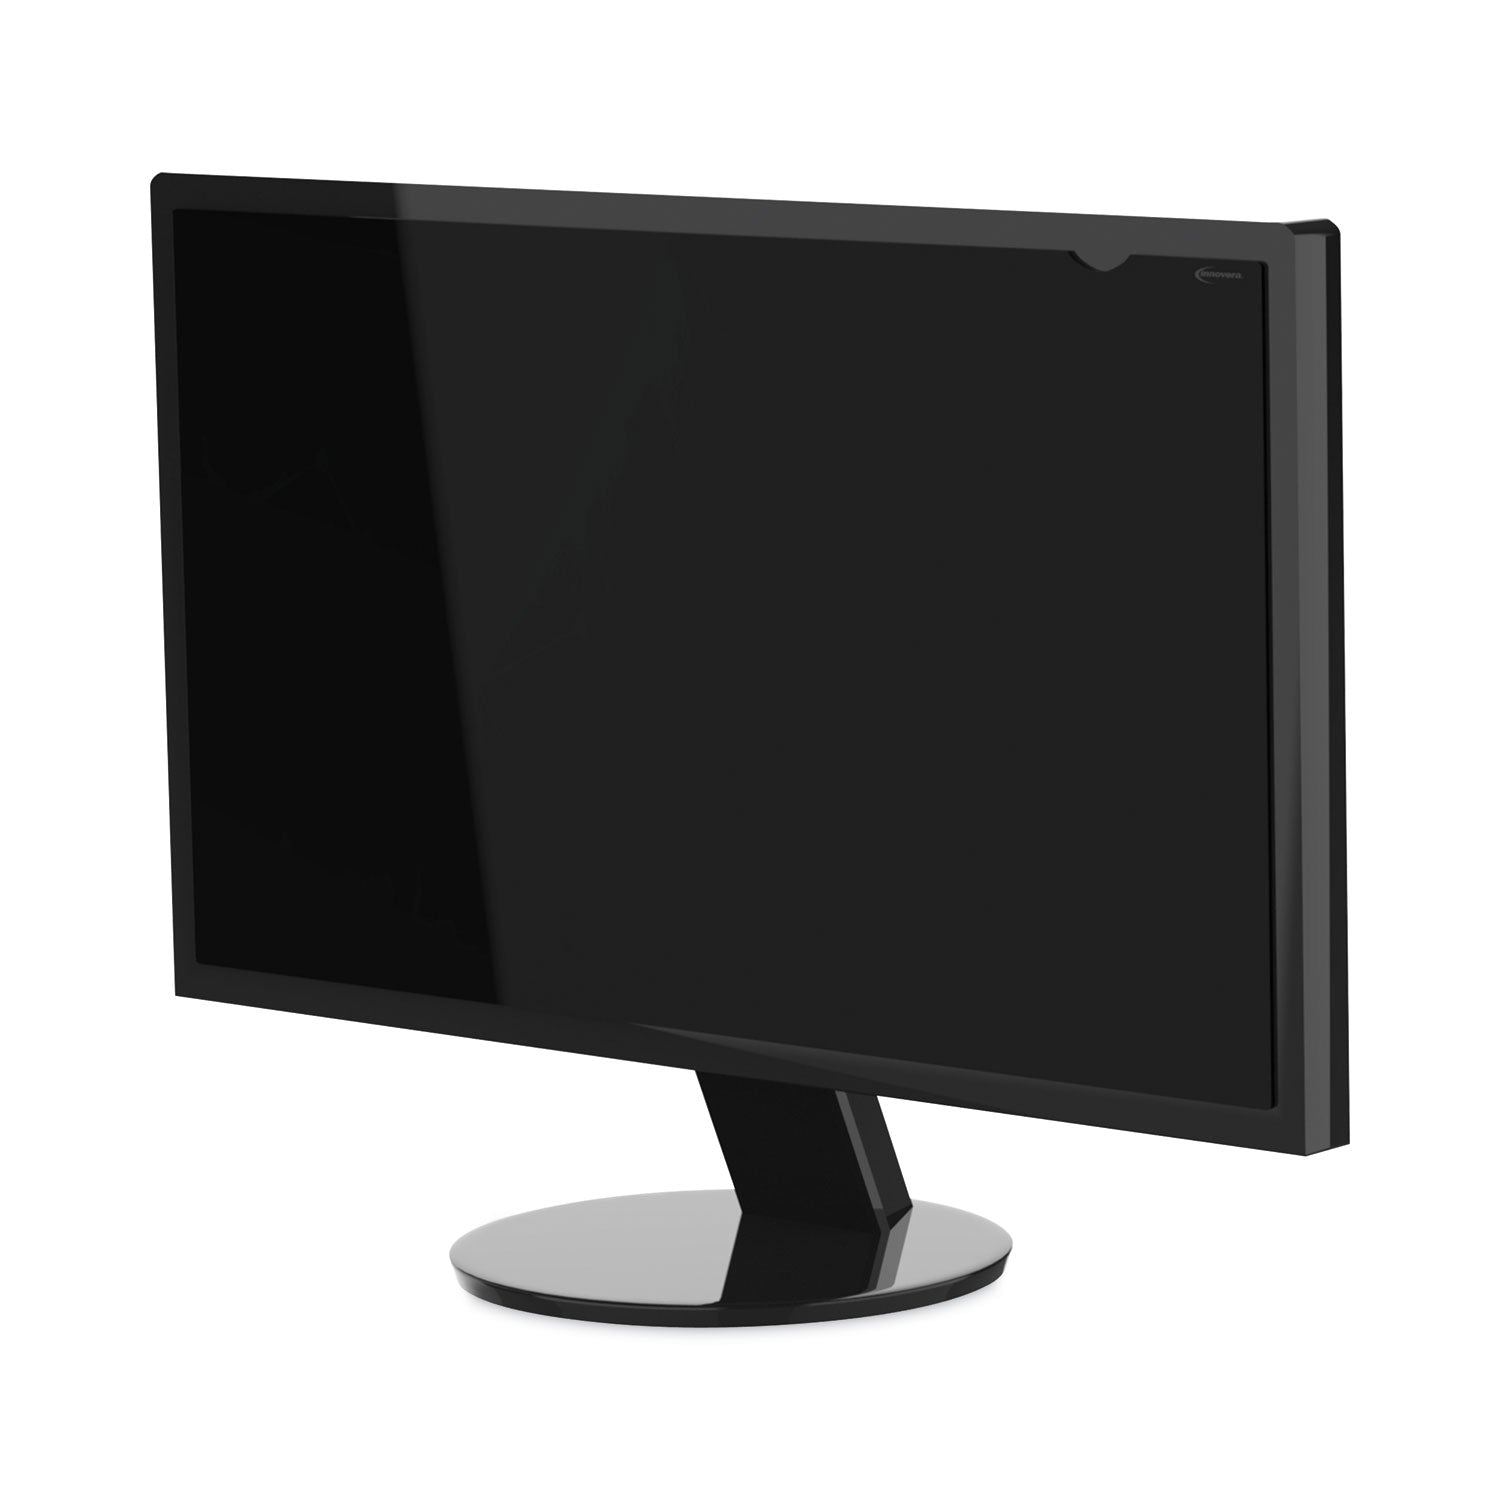 blackout-privacy-monitor-filter-for-238-widescreen-flat-panel-monitor-169-aspect-ratio_ivrblf238w - 6